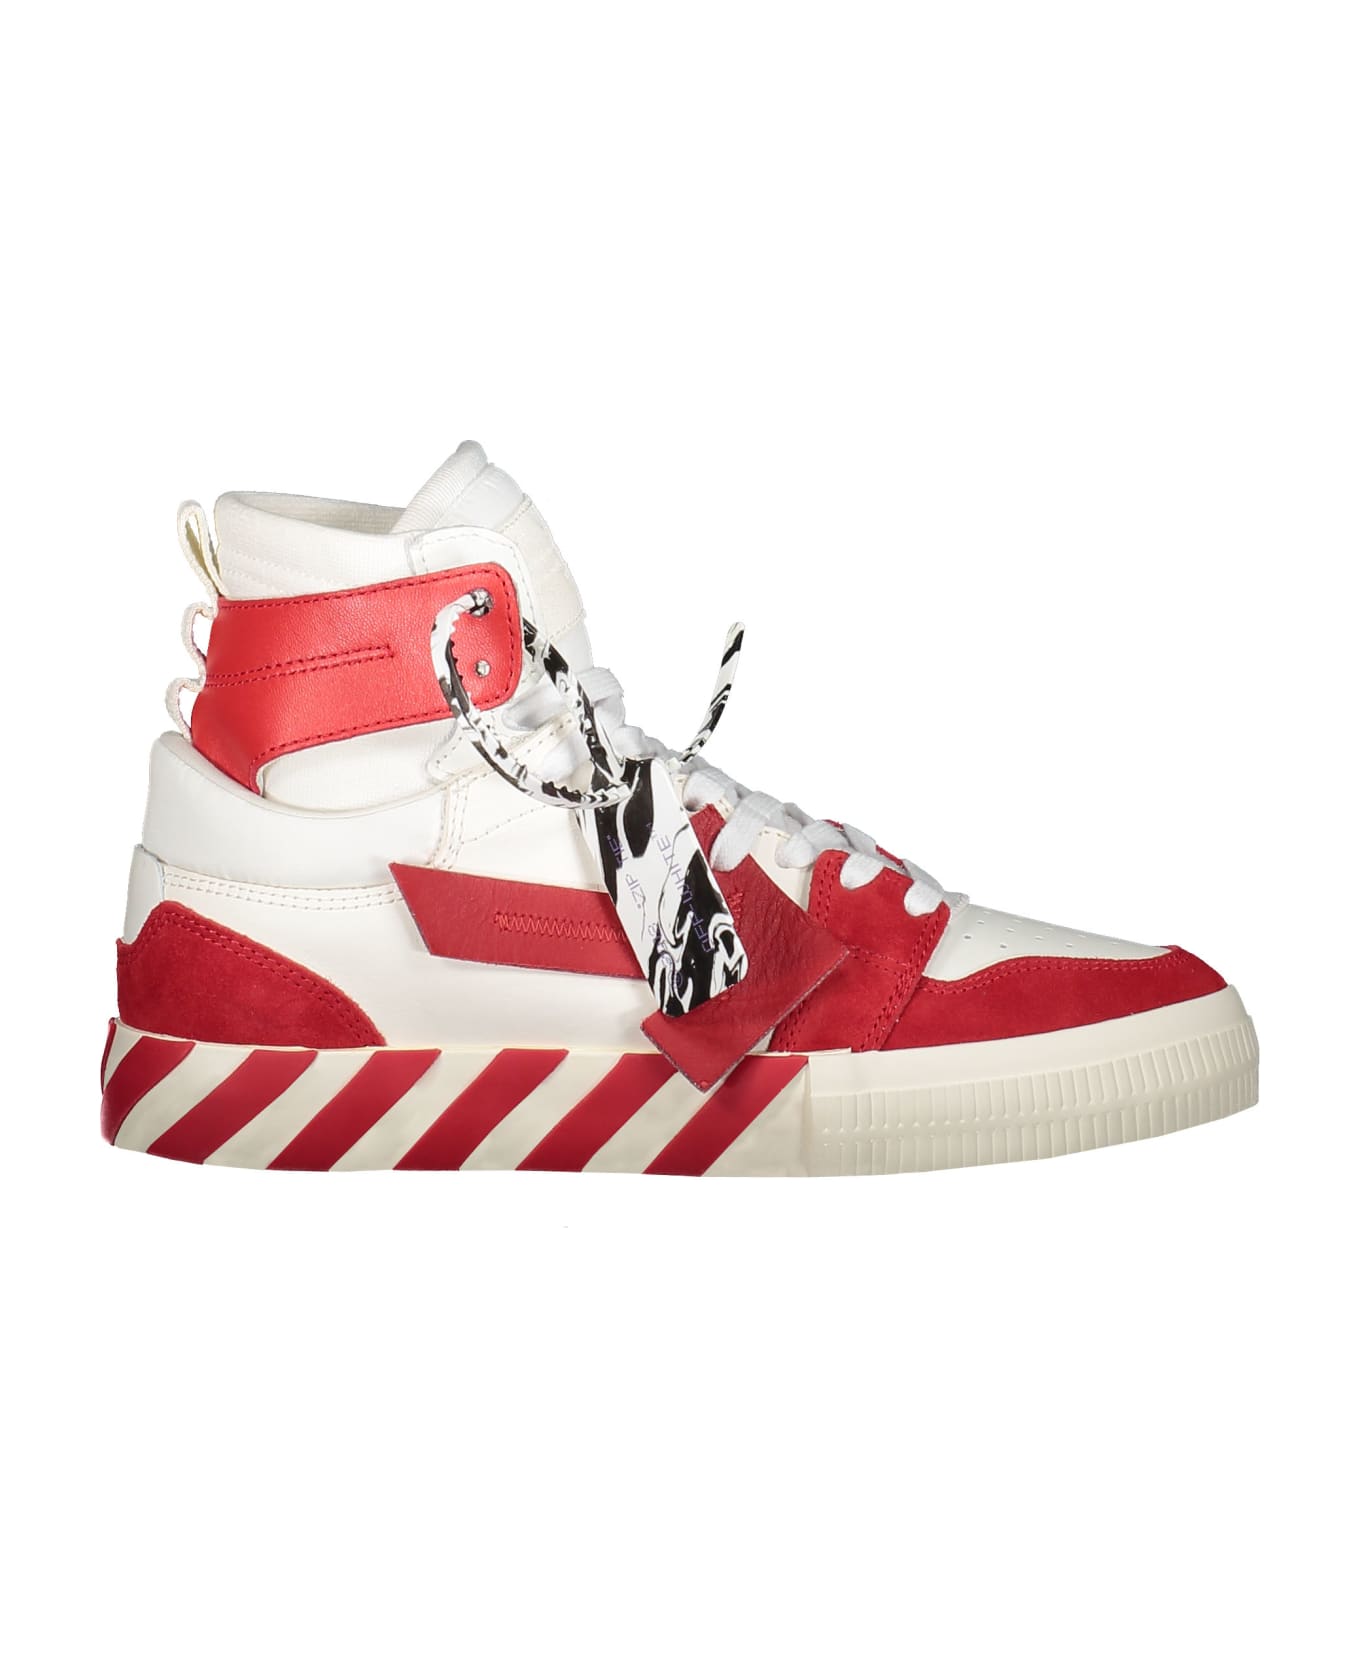 Off-White Vulcanized High-top Sneakers - red